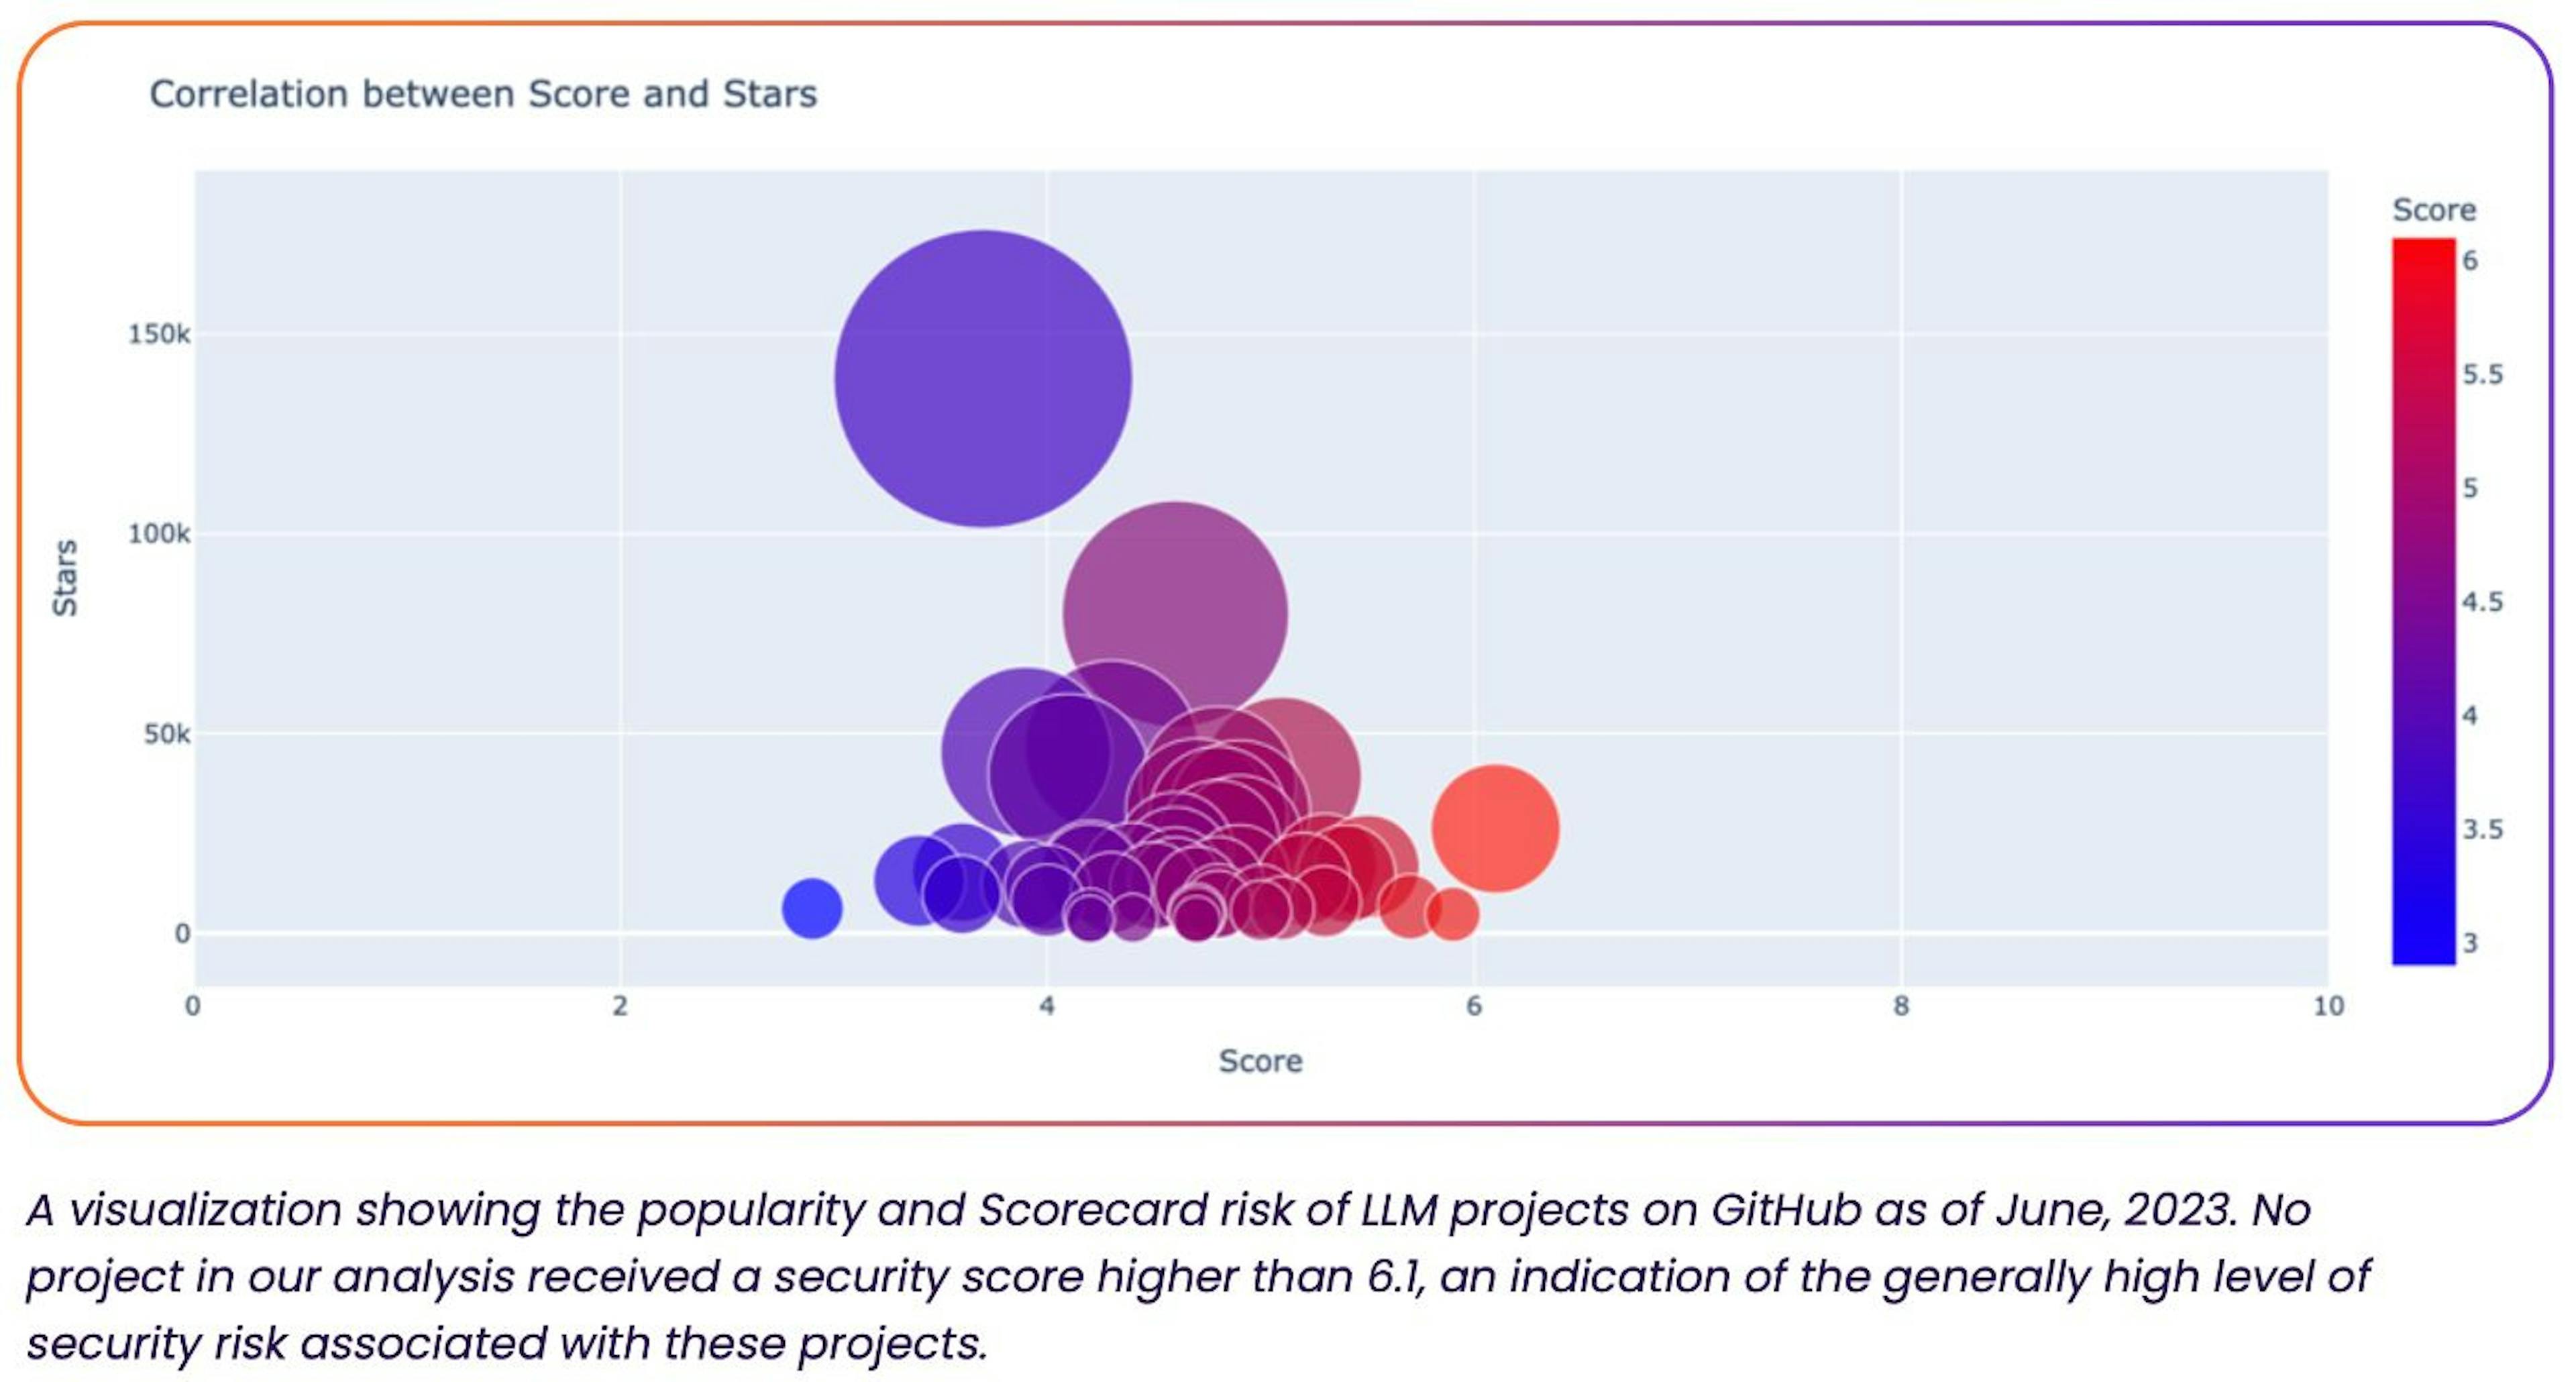 Rezilion's visualization showing Github star popularity correlating to a generally high level of security risk. 